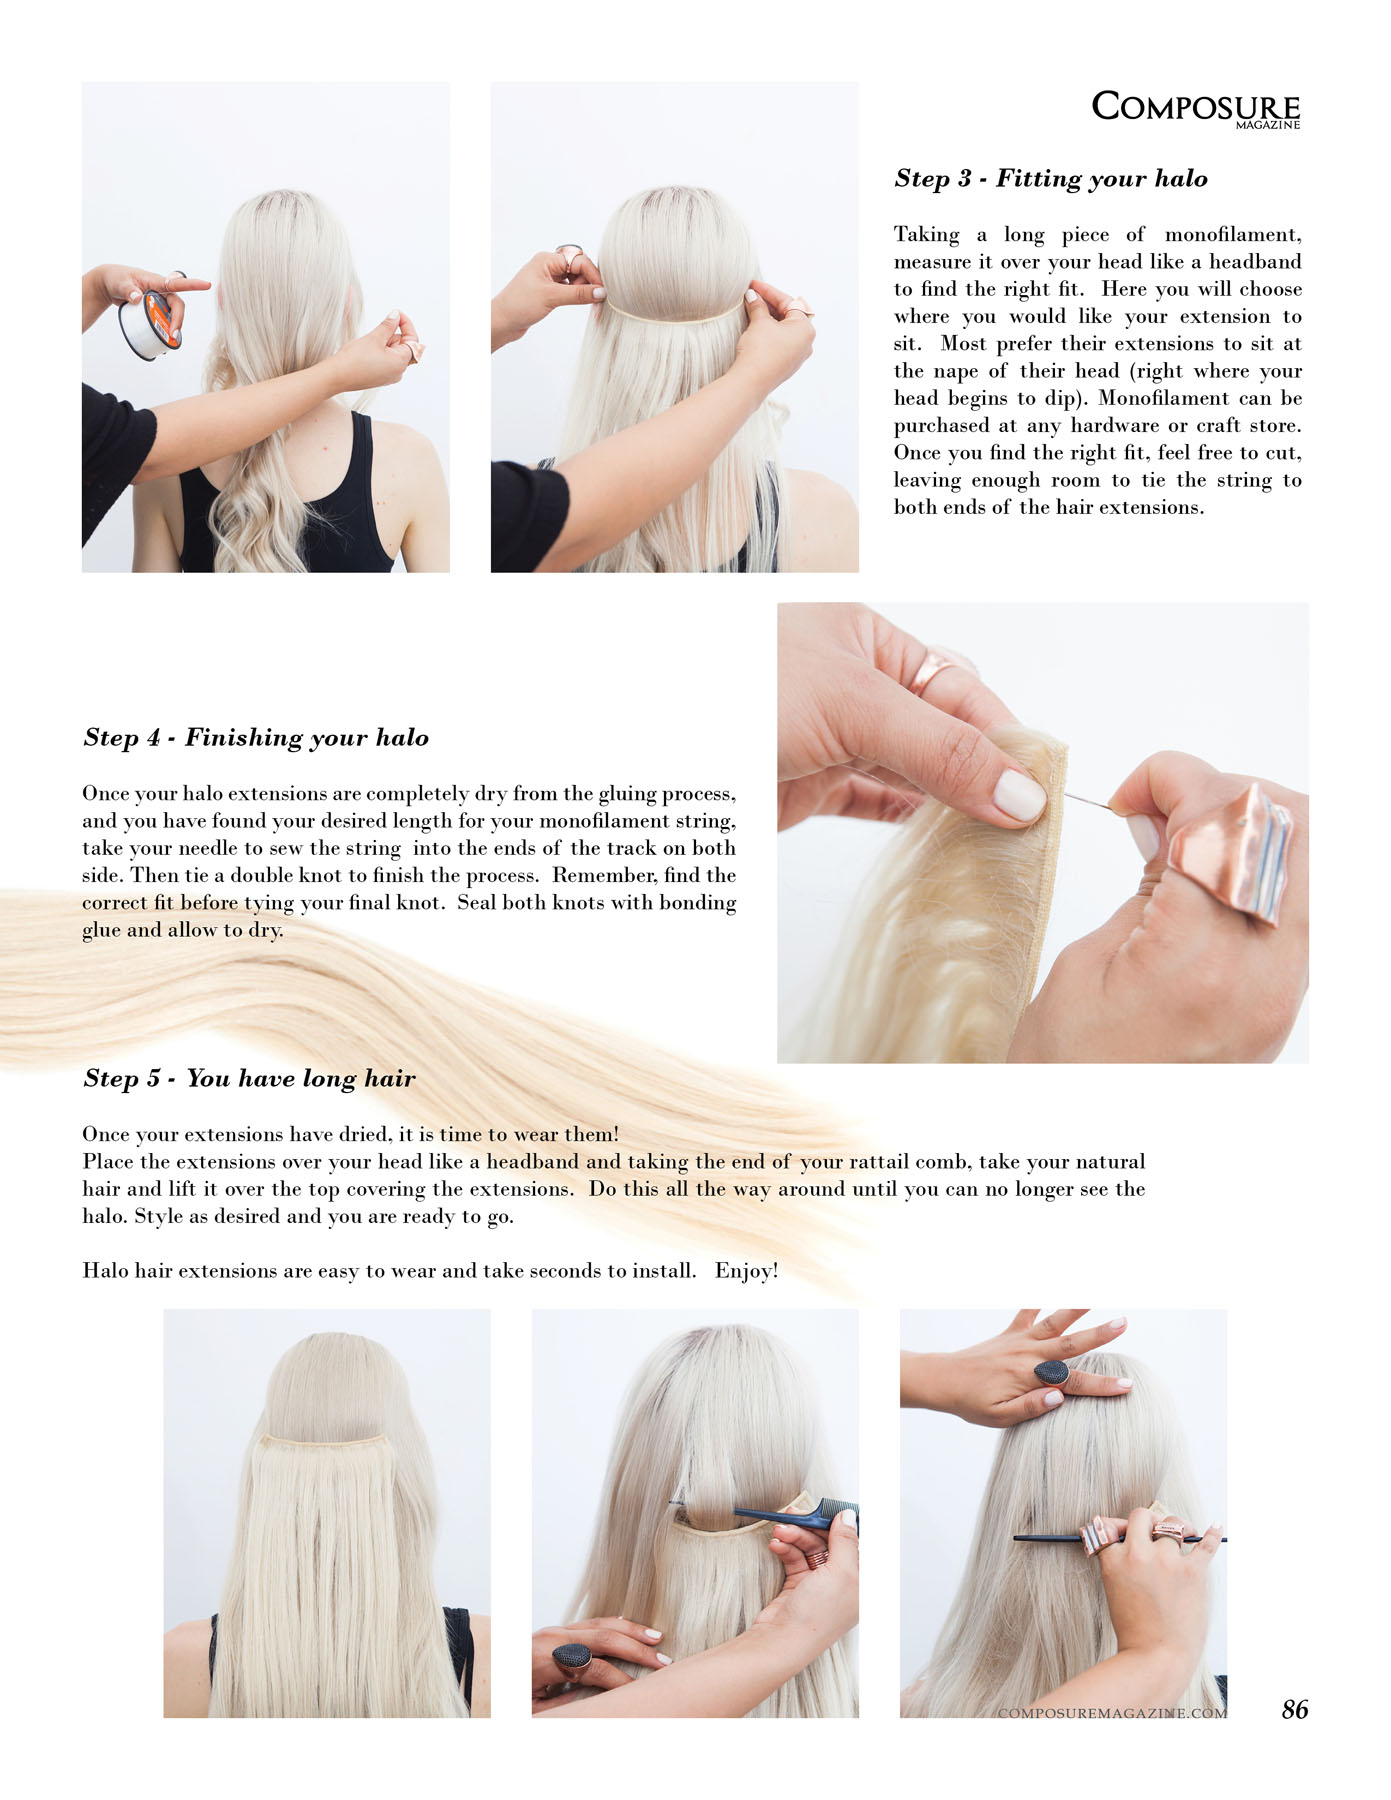 How to guide for Halo Hair Extensions